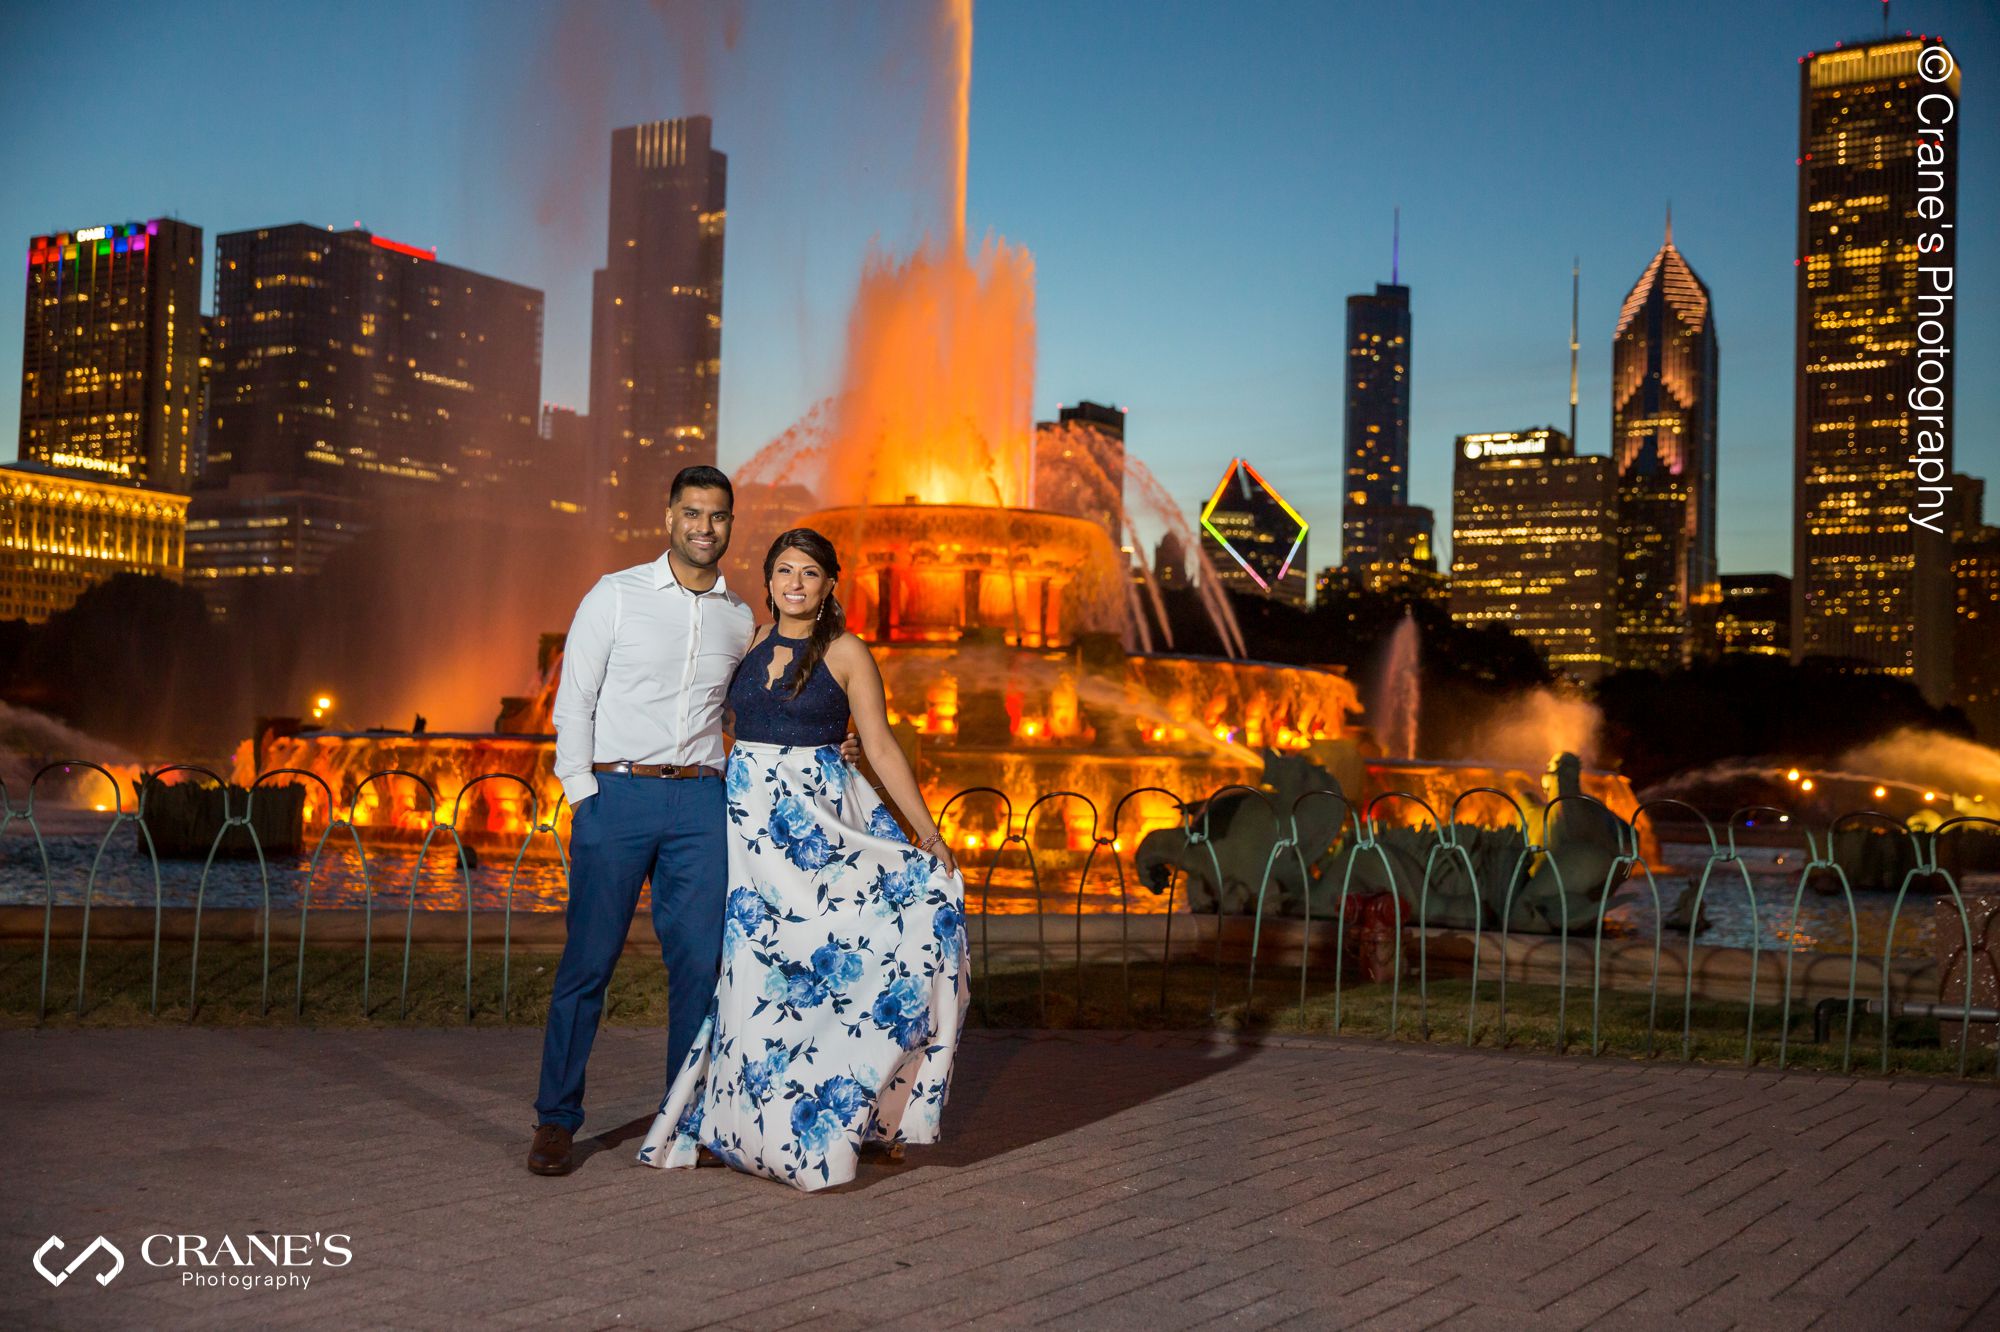 An Indian couple wearing blue outfits taking an engagement photos at the Buckingham Fountain at night